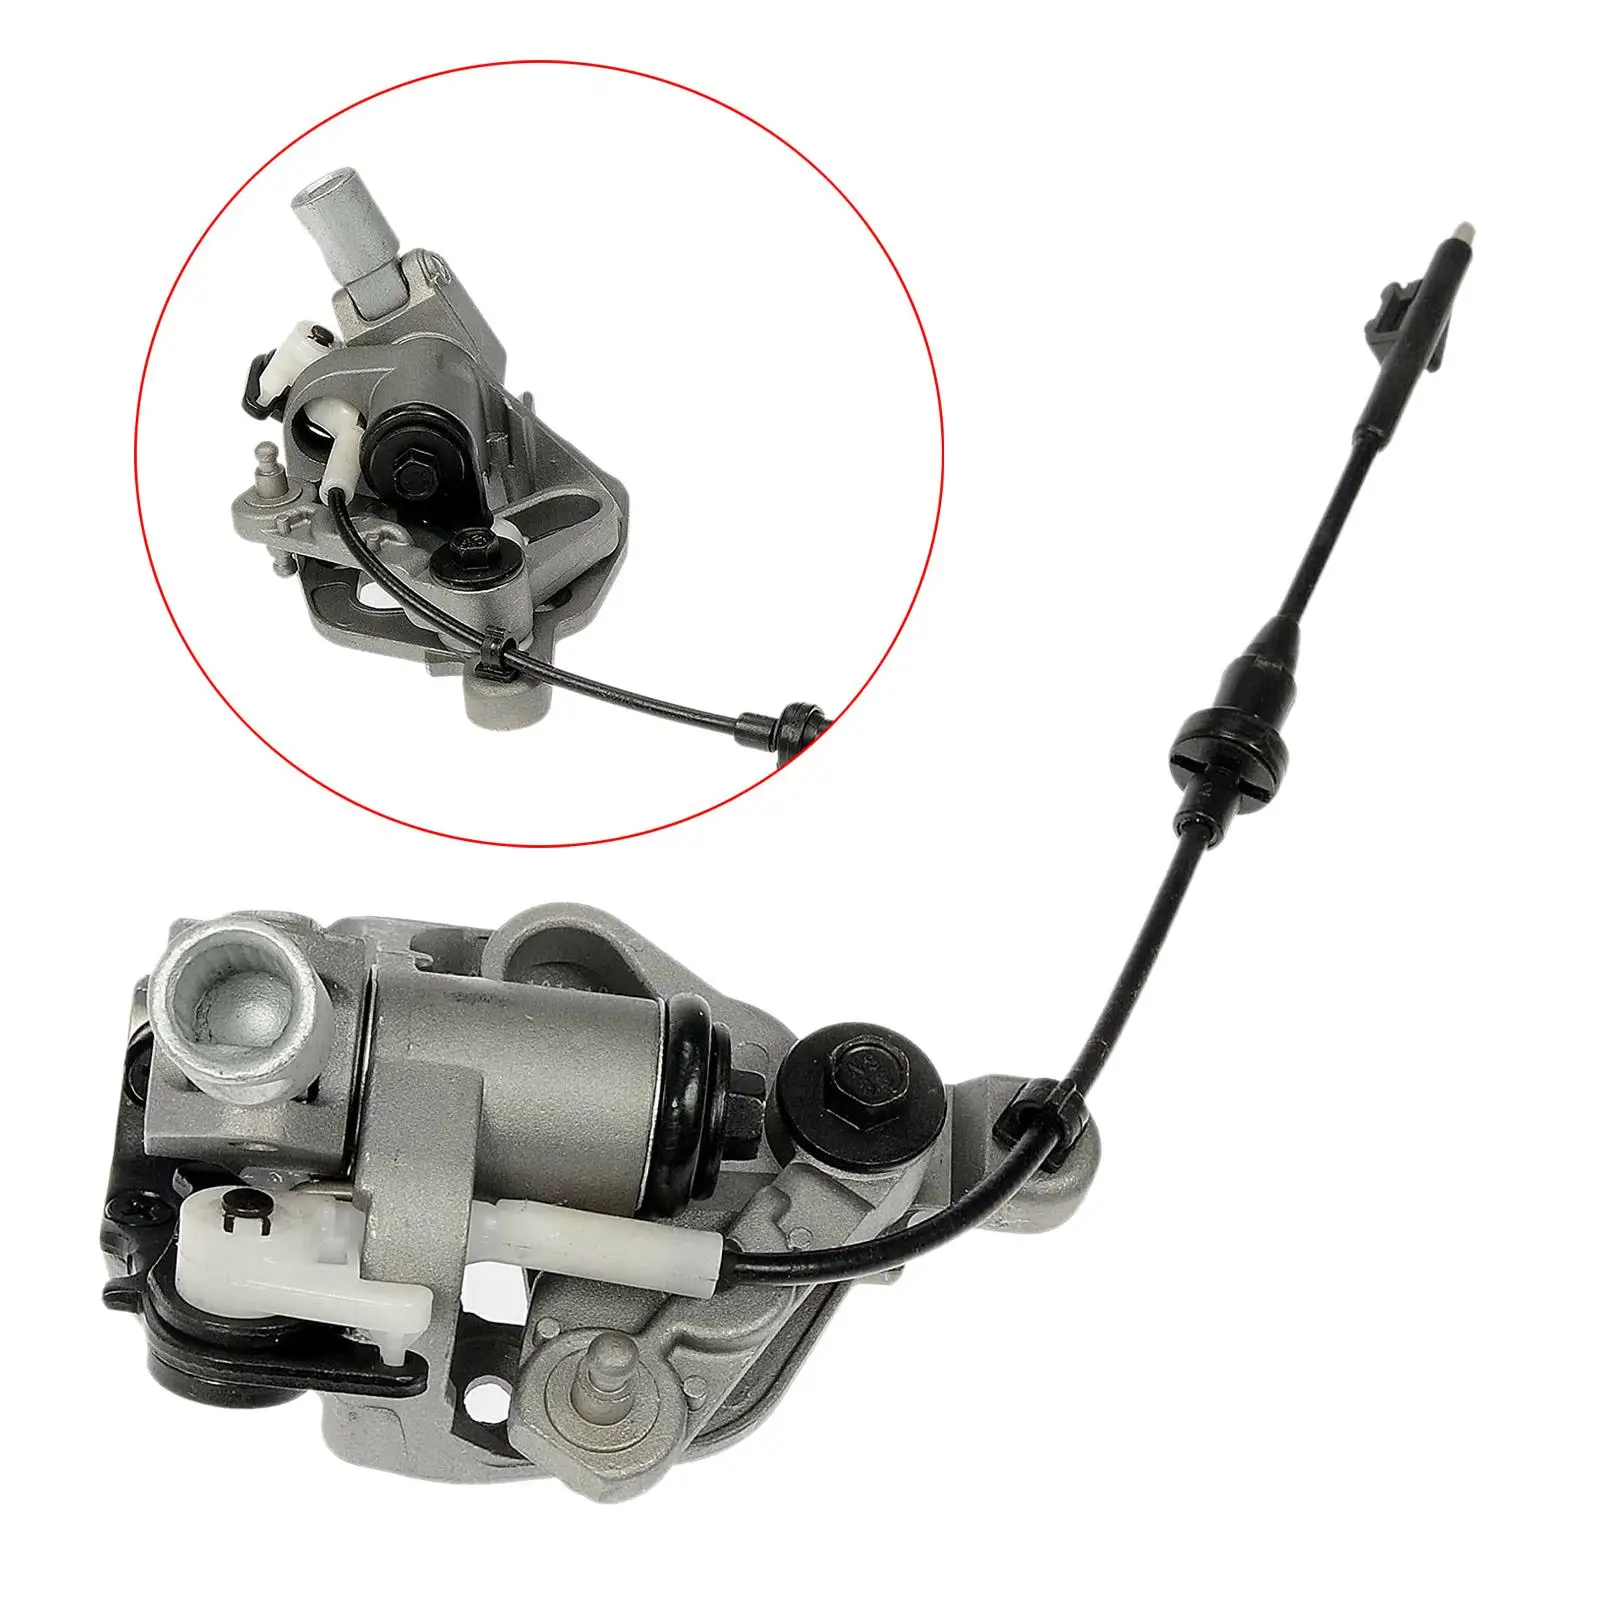 Steering Column Shift Control Mechanism 26091246 905-101 Mounting Hardware Replacement Repair Parts Assembly for Yukon 1500